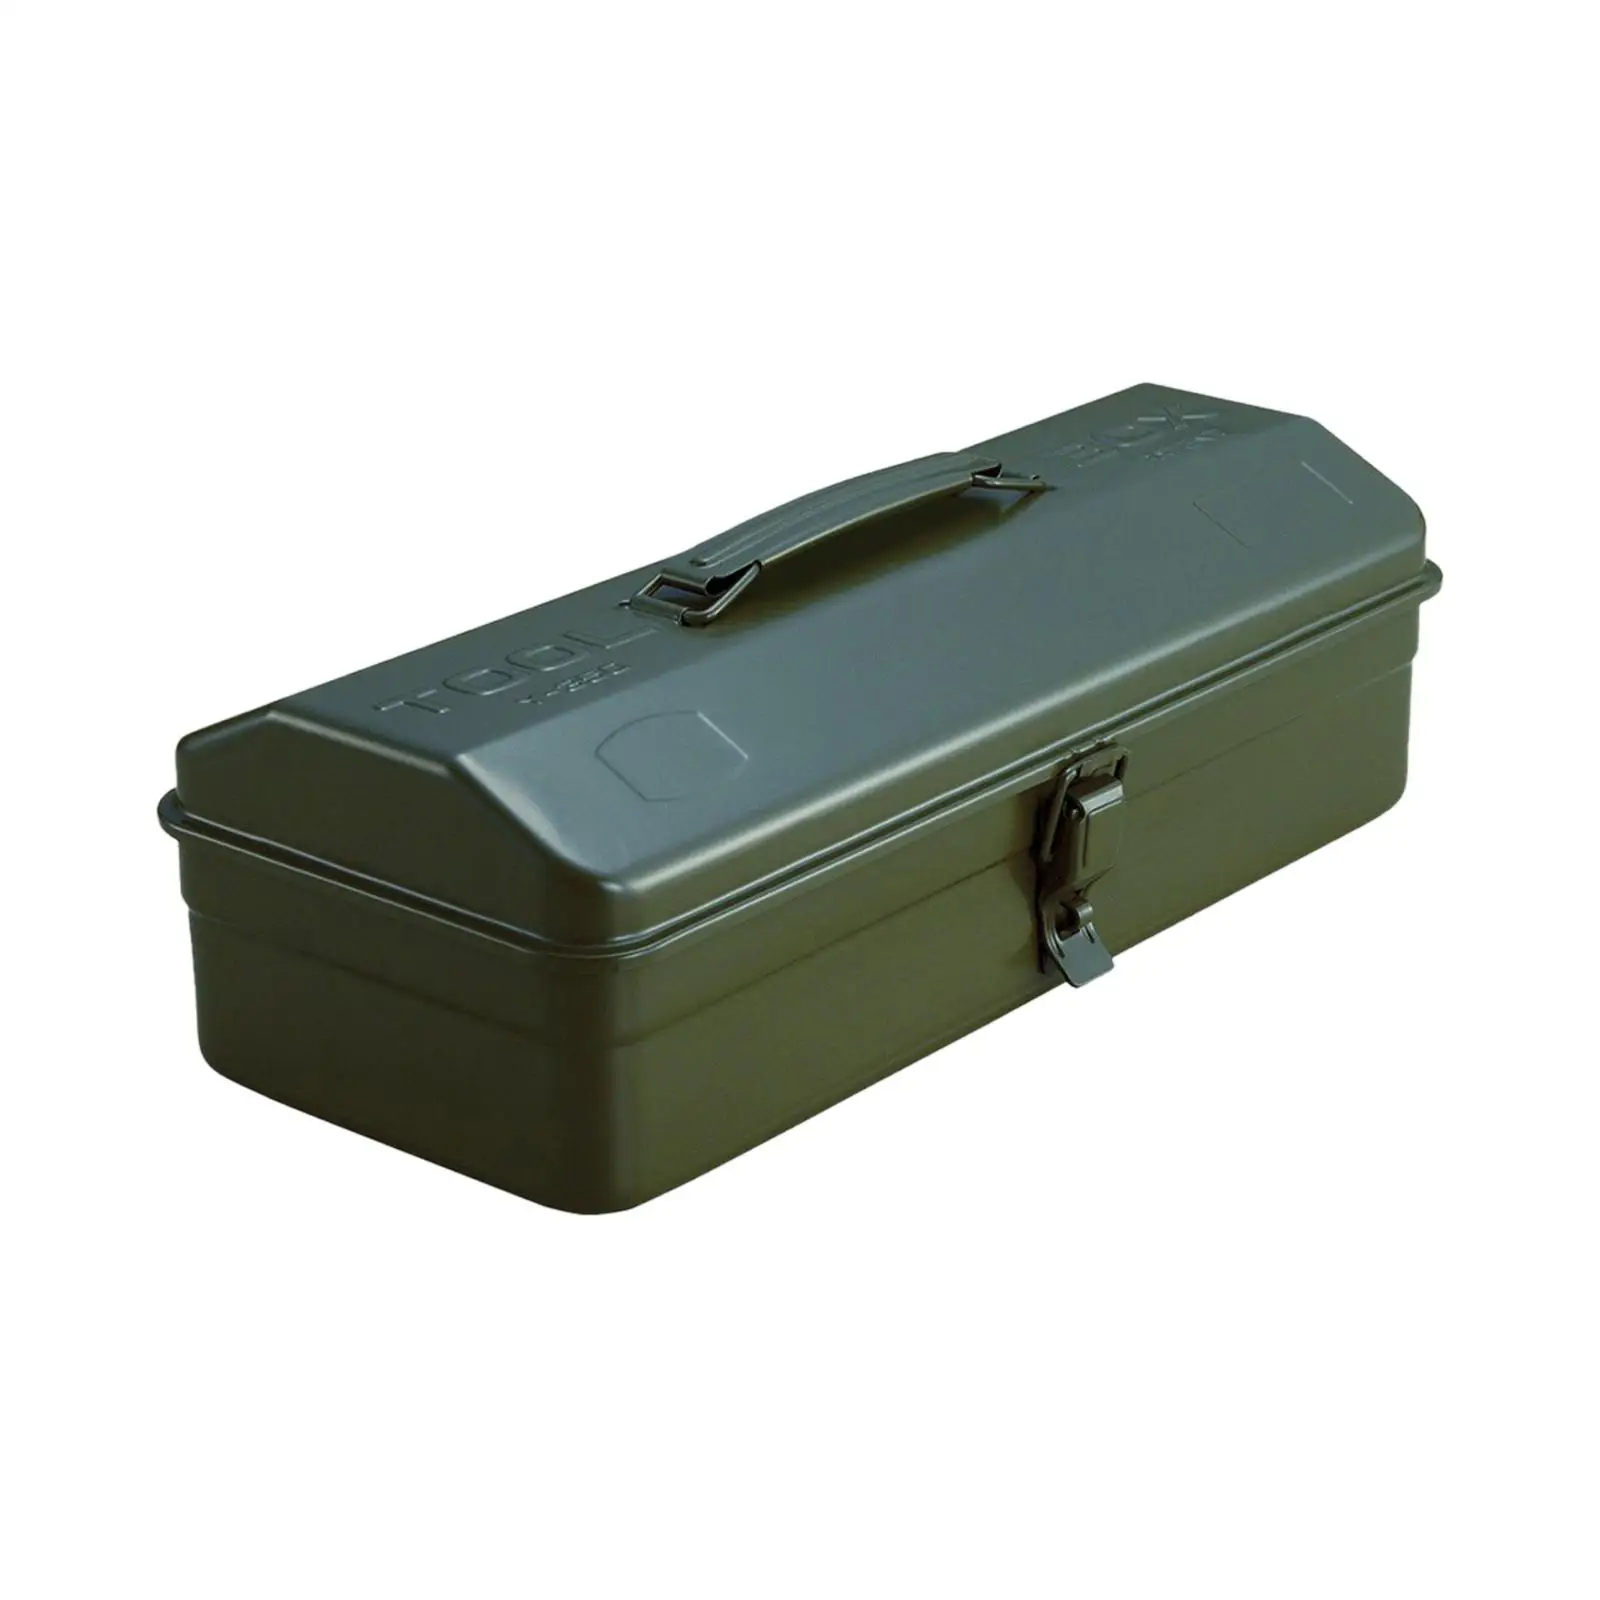 Tool Box Large Hand Tools Storage Carrying Case Electrician Repairs Box for Car Home Improvement Maintenance Garage Accessories